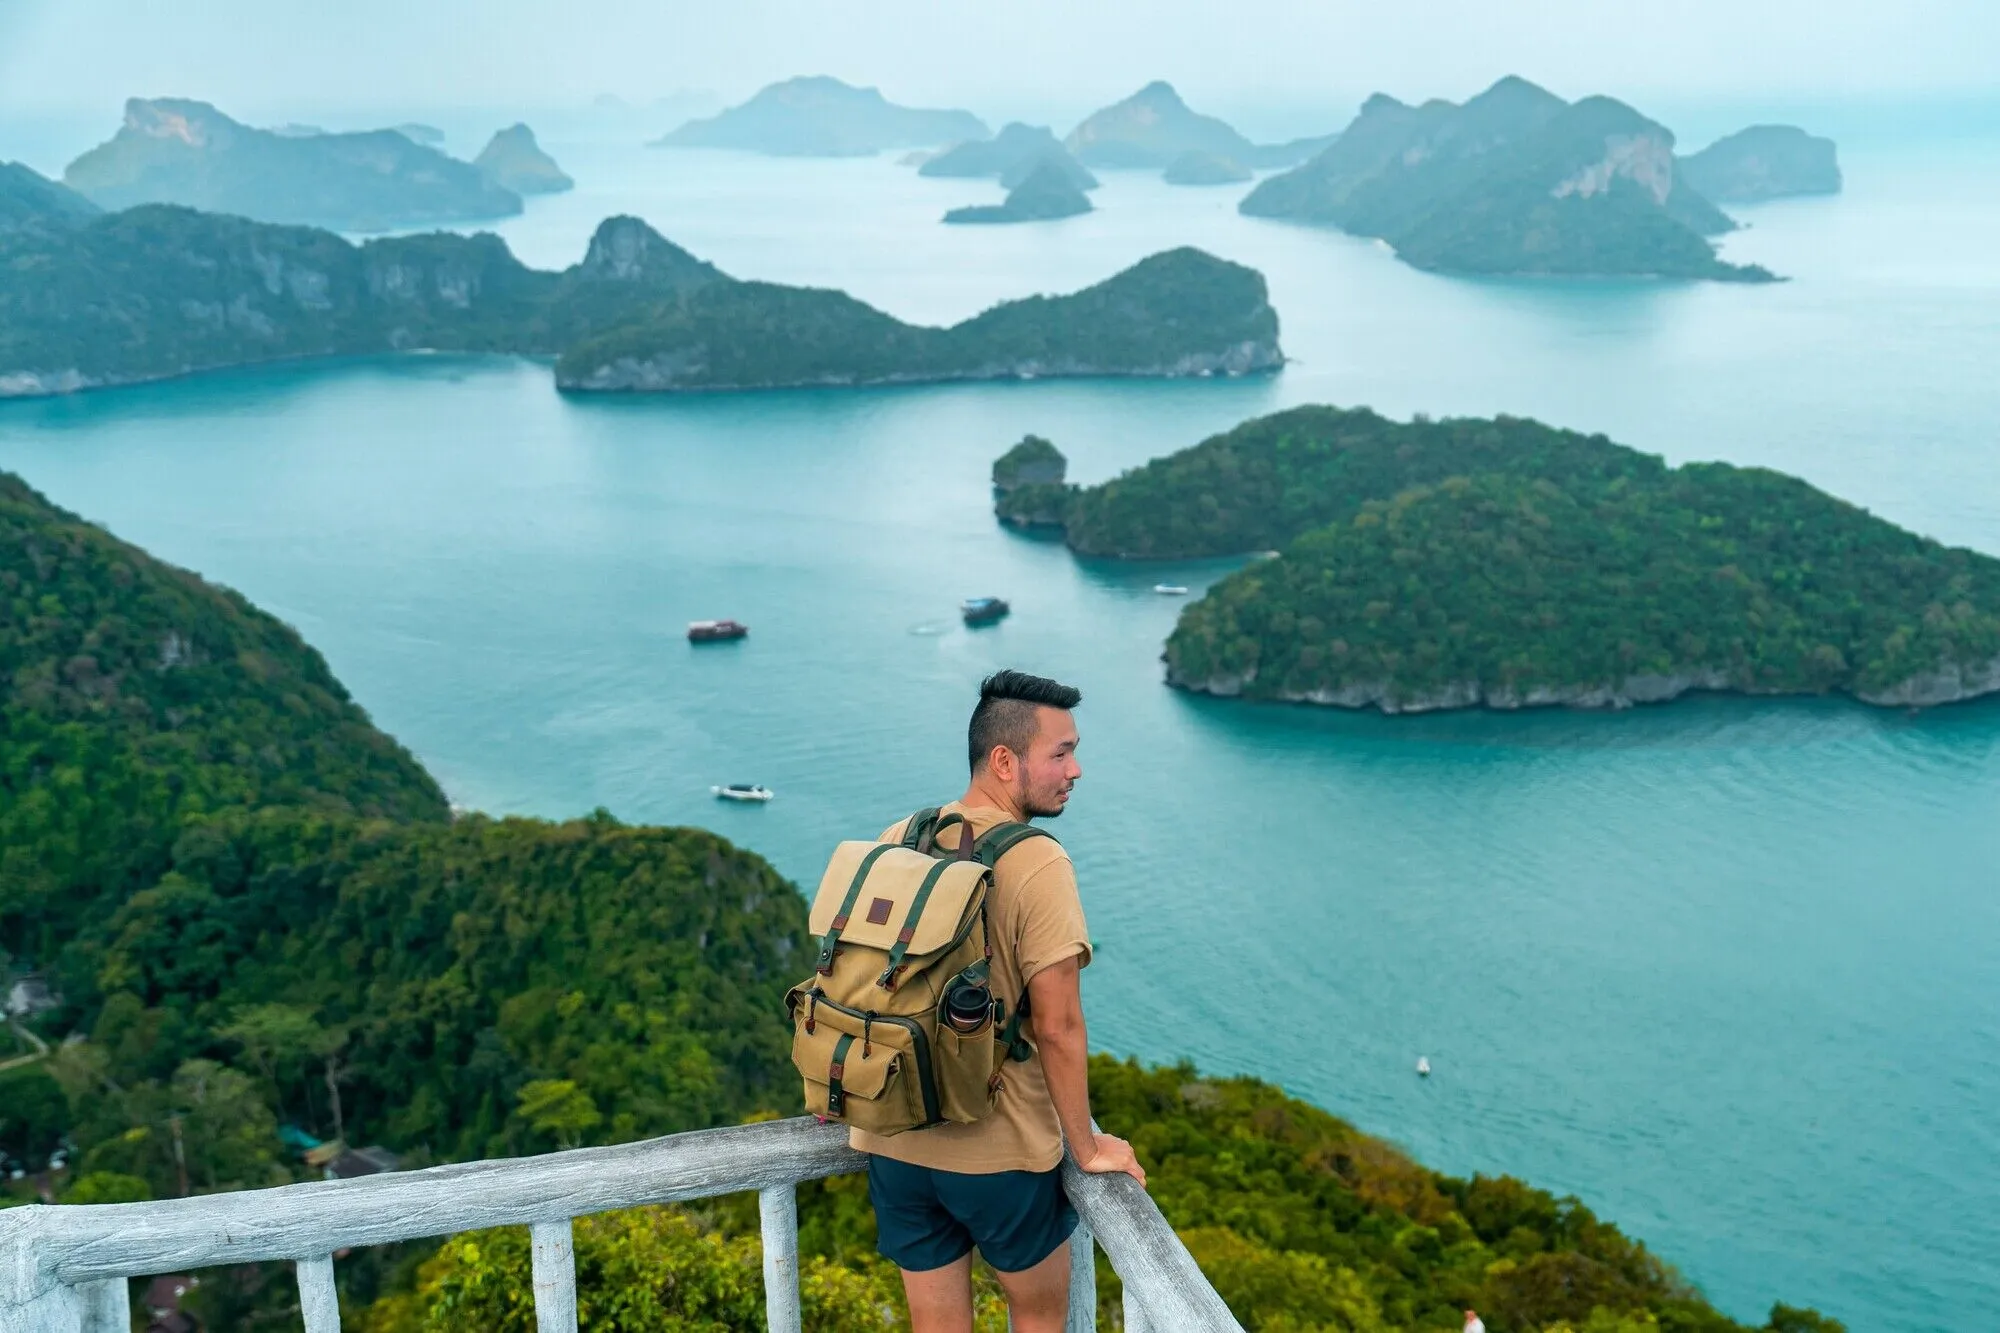 13 Awesome Things to Do in Koh Samui for First-Timers - A Complete Guide to Backpacking Koh Samui